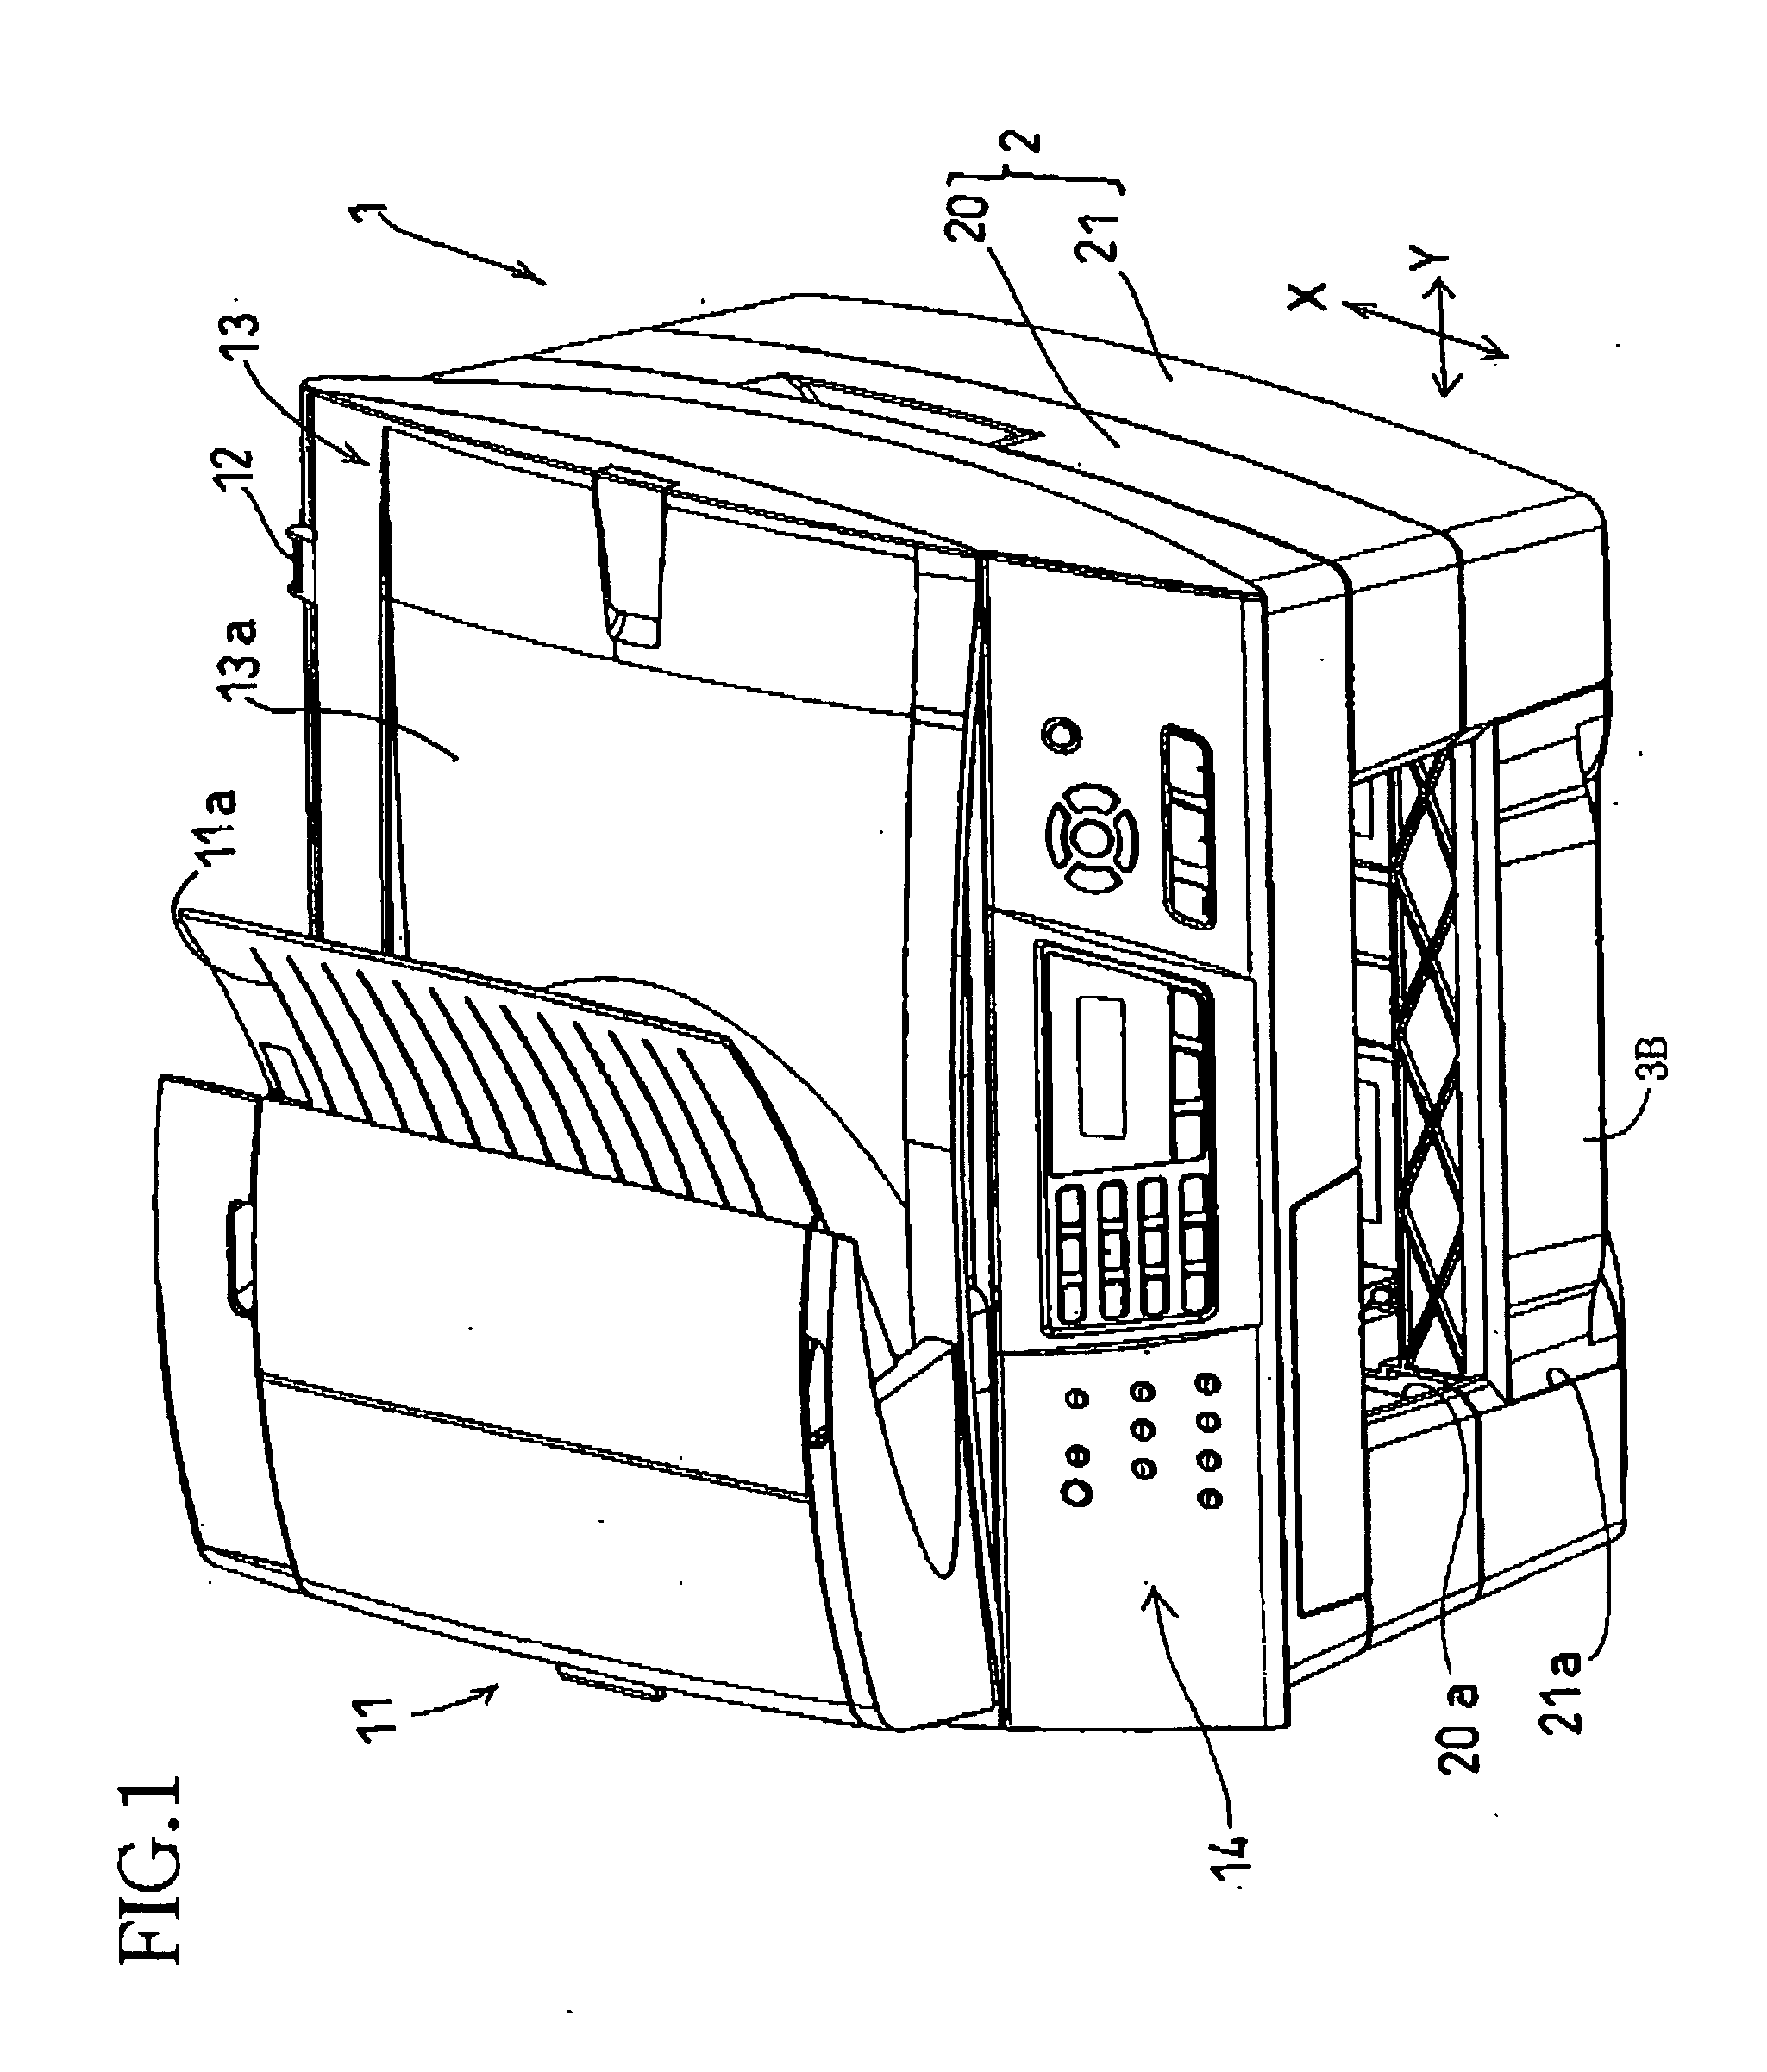 Sheet-supply cassette, and image recording apparatus including sheet-supply cassette